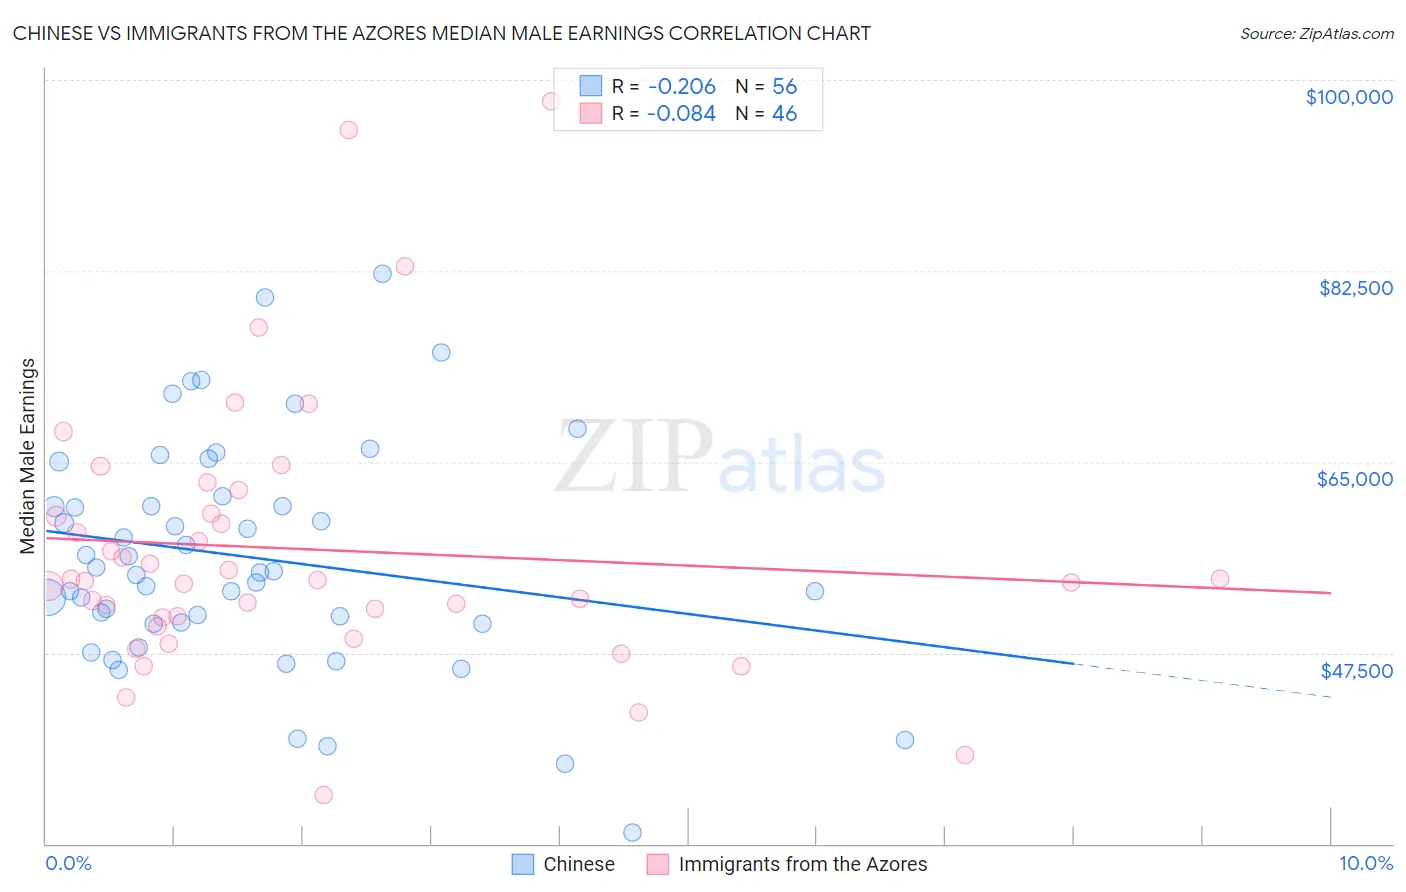 Chinese vs Immigrants from the Azores Median Male Earnings